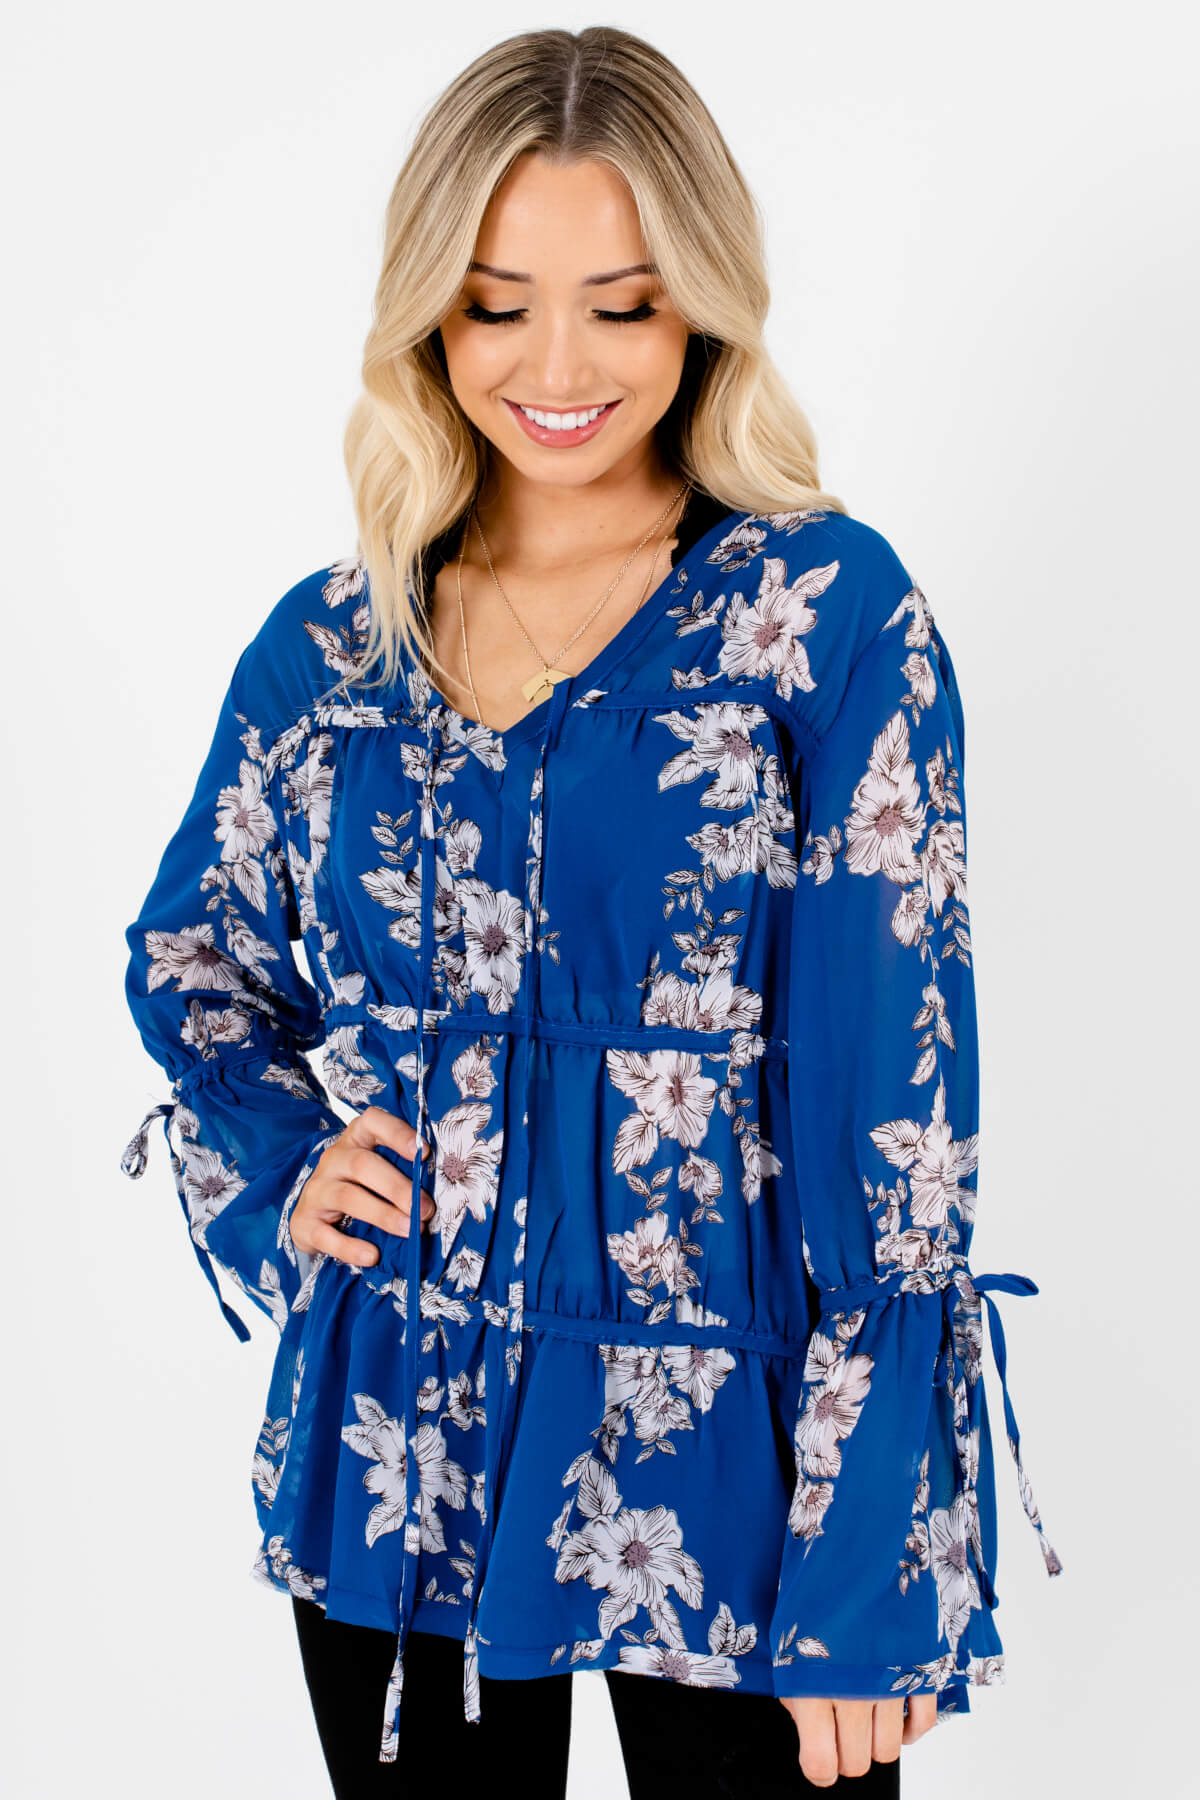 Royal Blue Floral Semi-Sheer Tiered Blouses Affordable Online Boutique